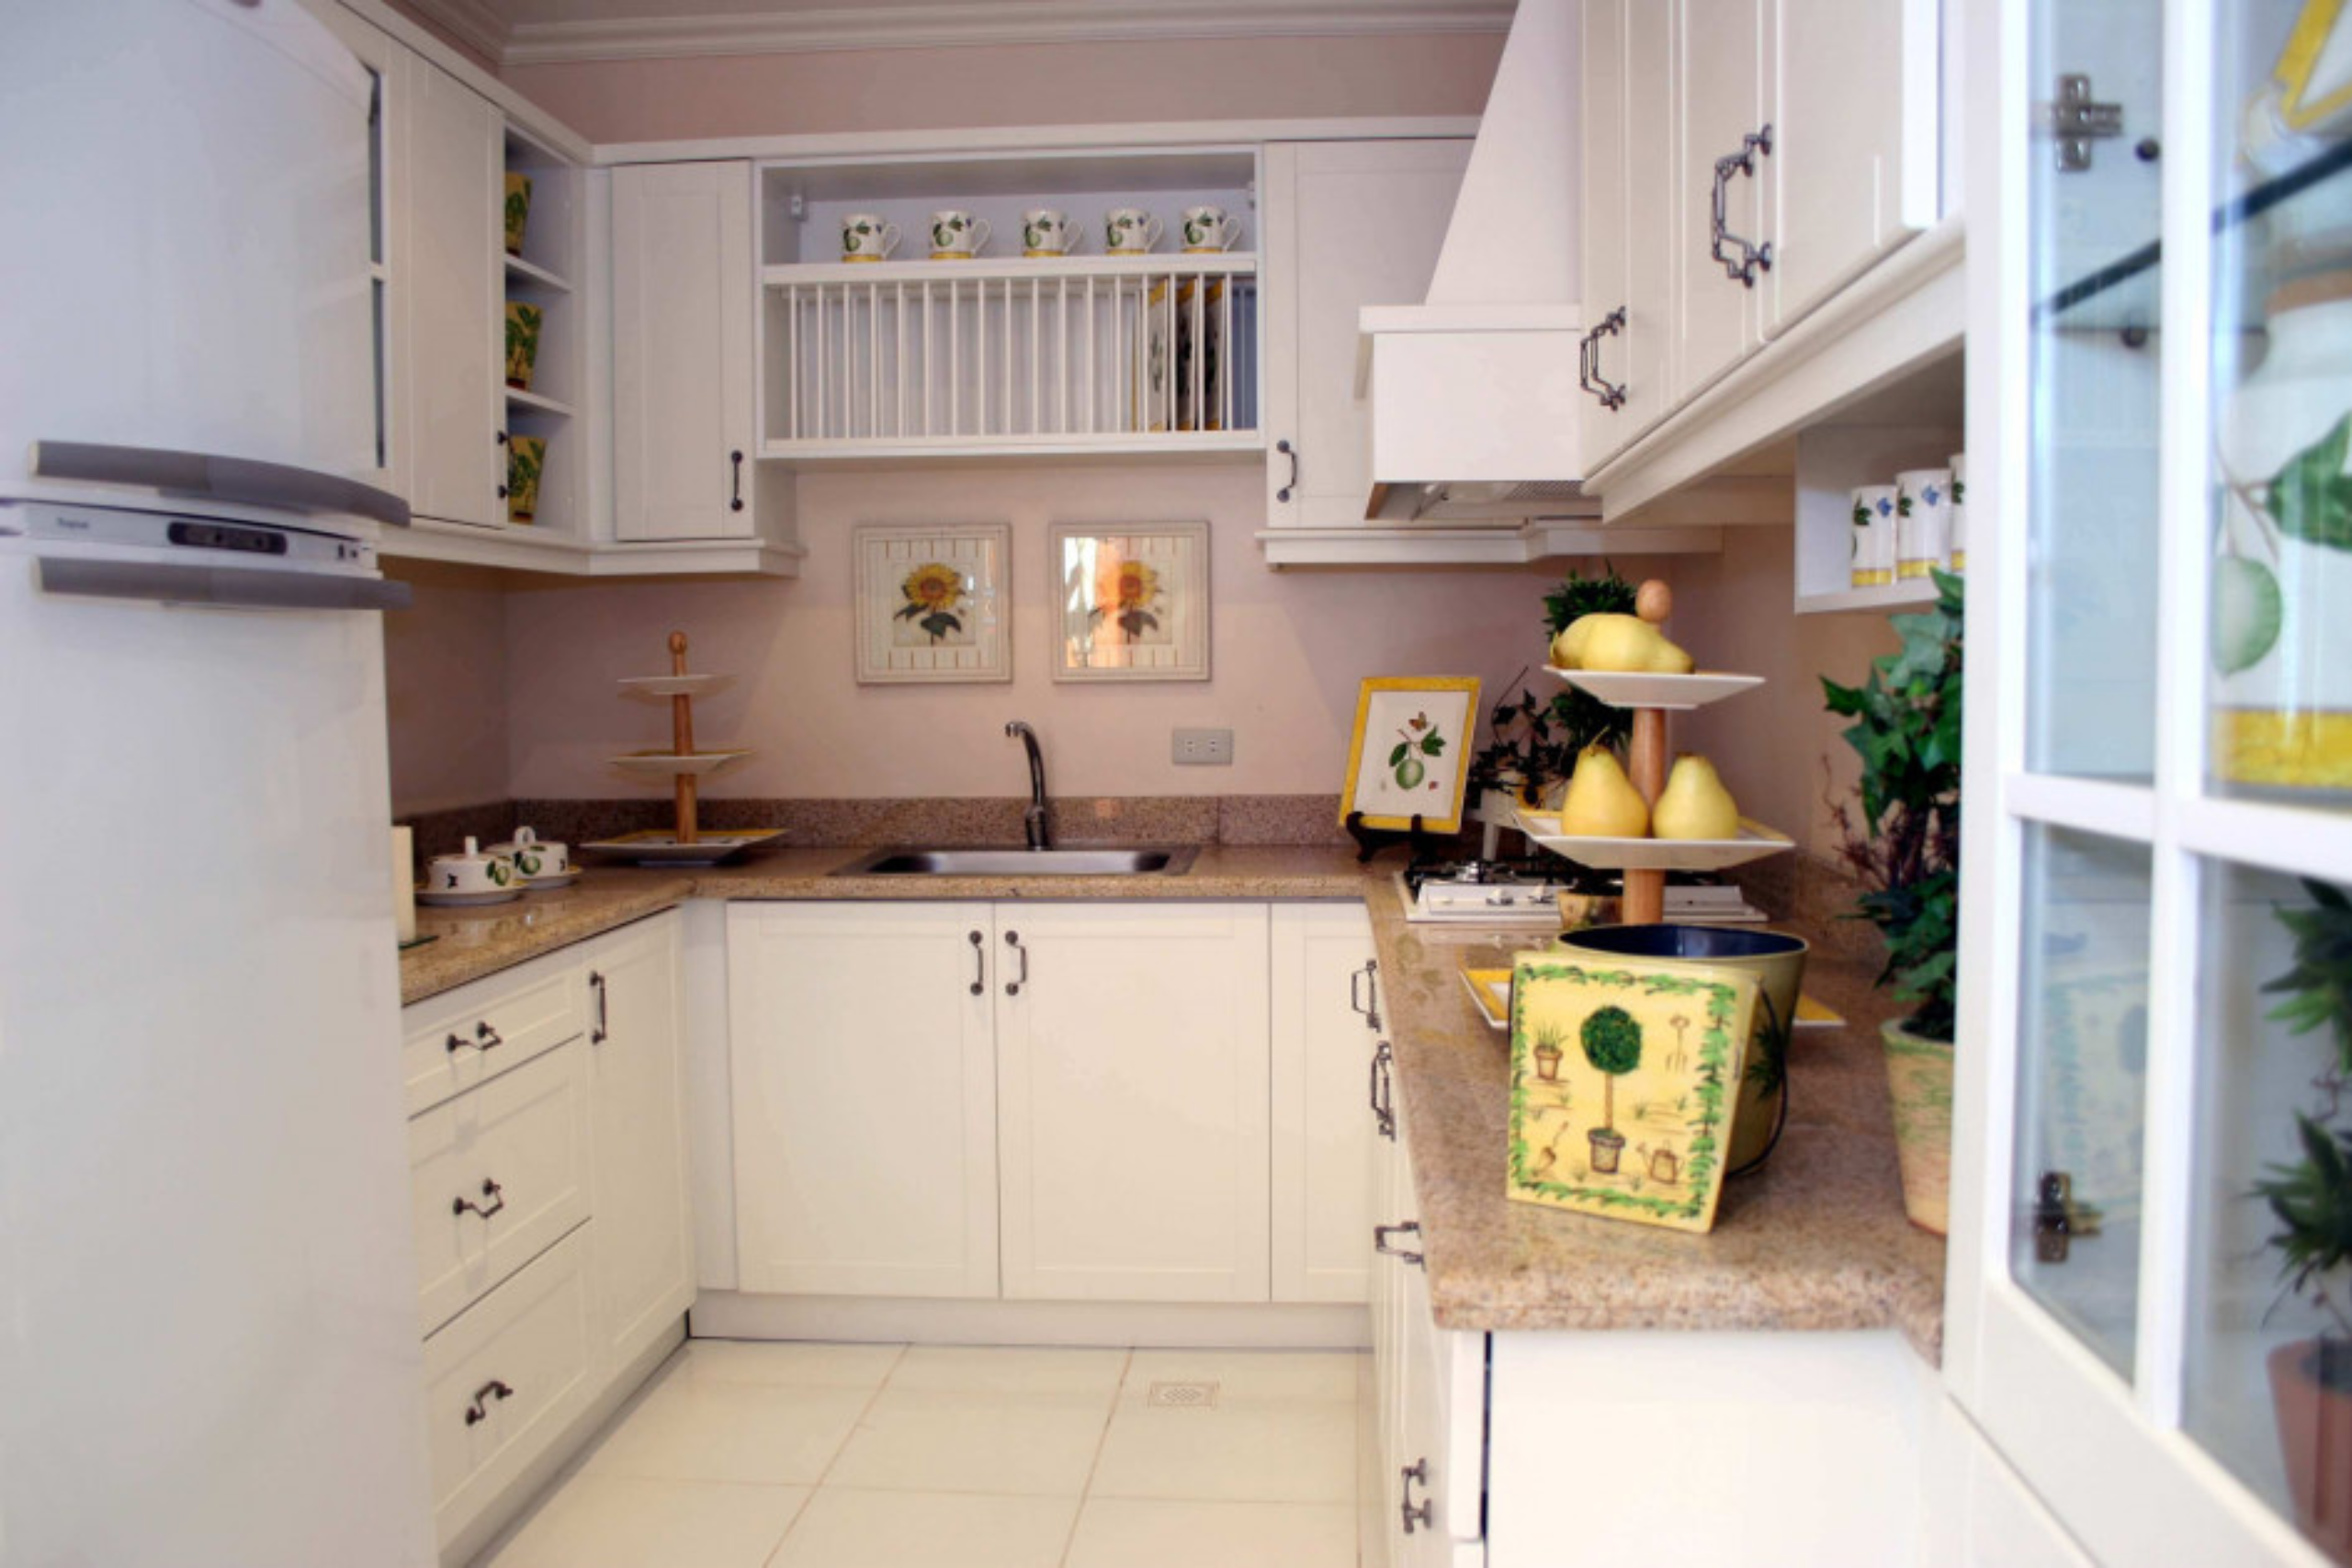 how to clean kitchen cabinets, best way to clean kitchen cabinet